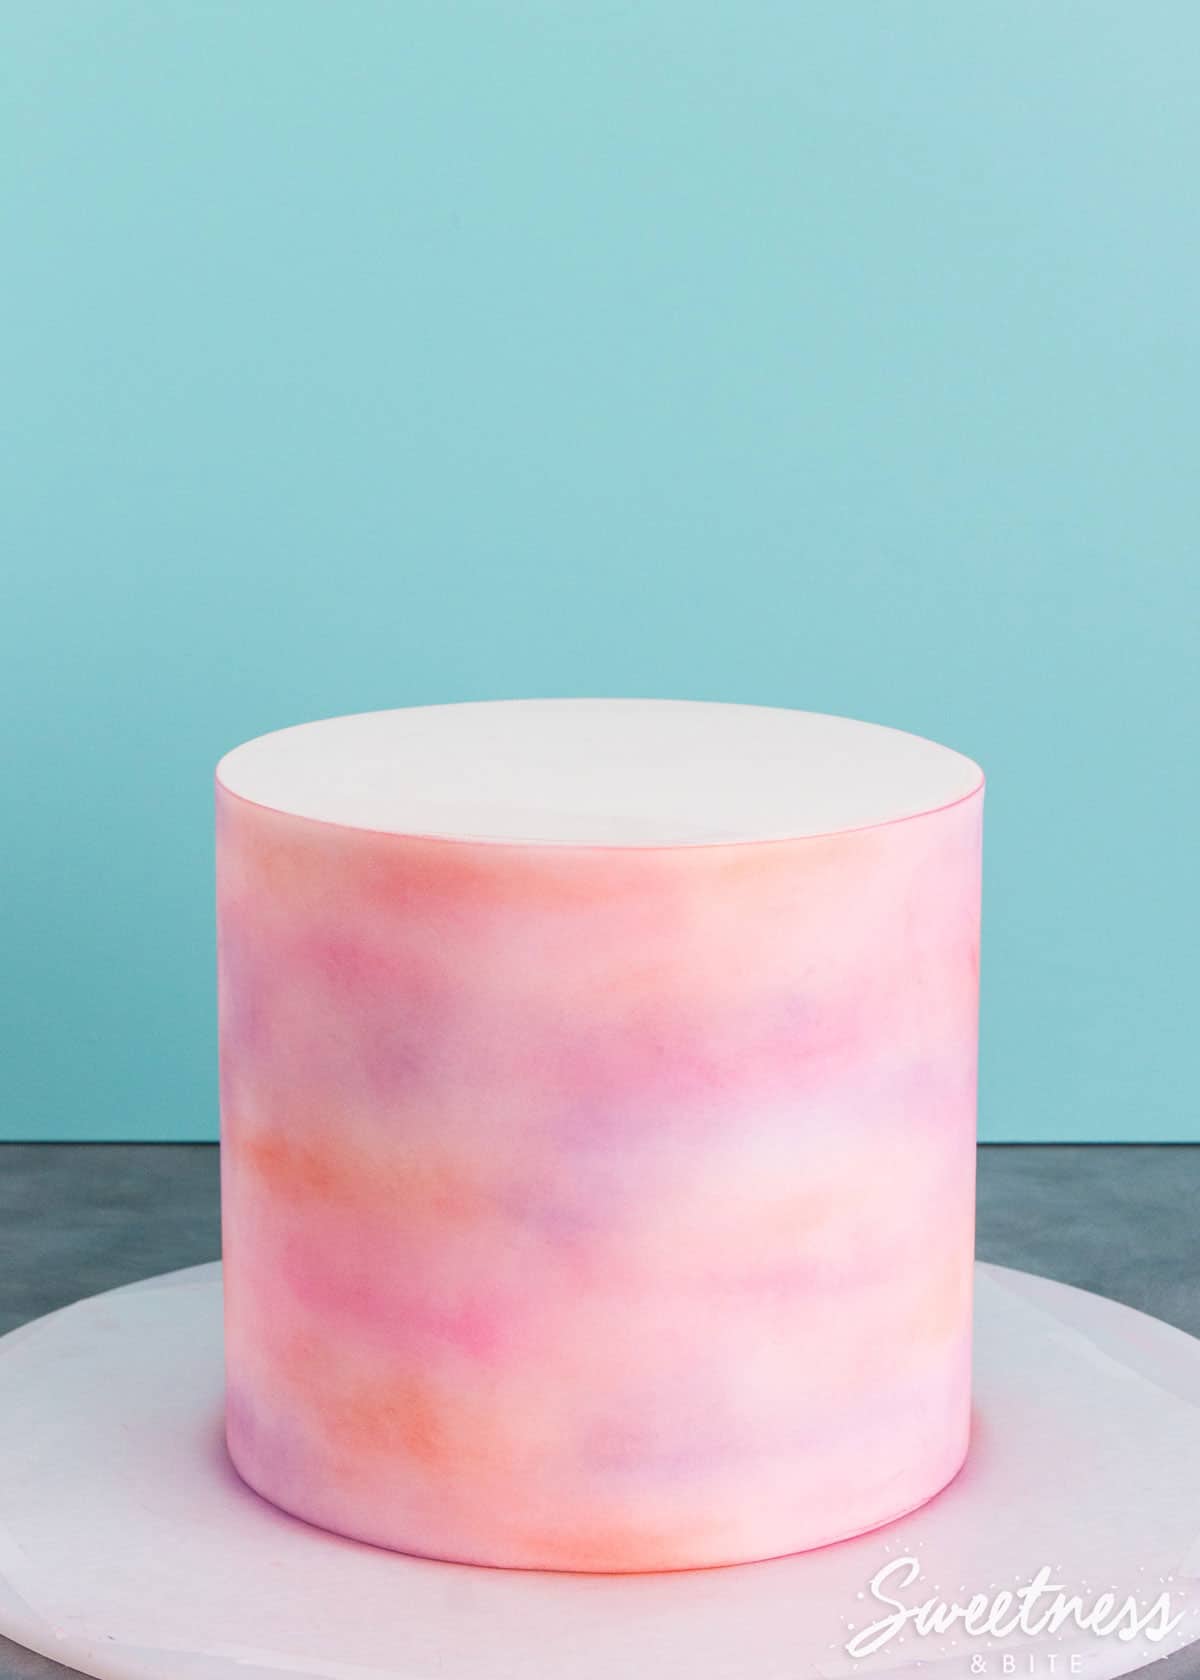 How to Paint a Watercolor Cake | The Cake Blog